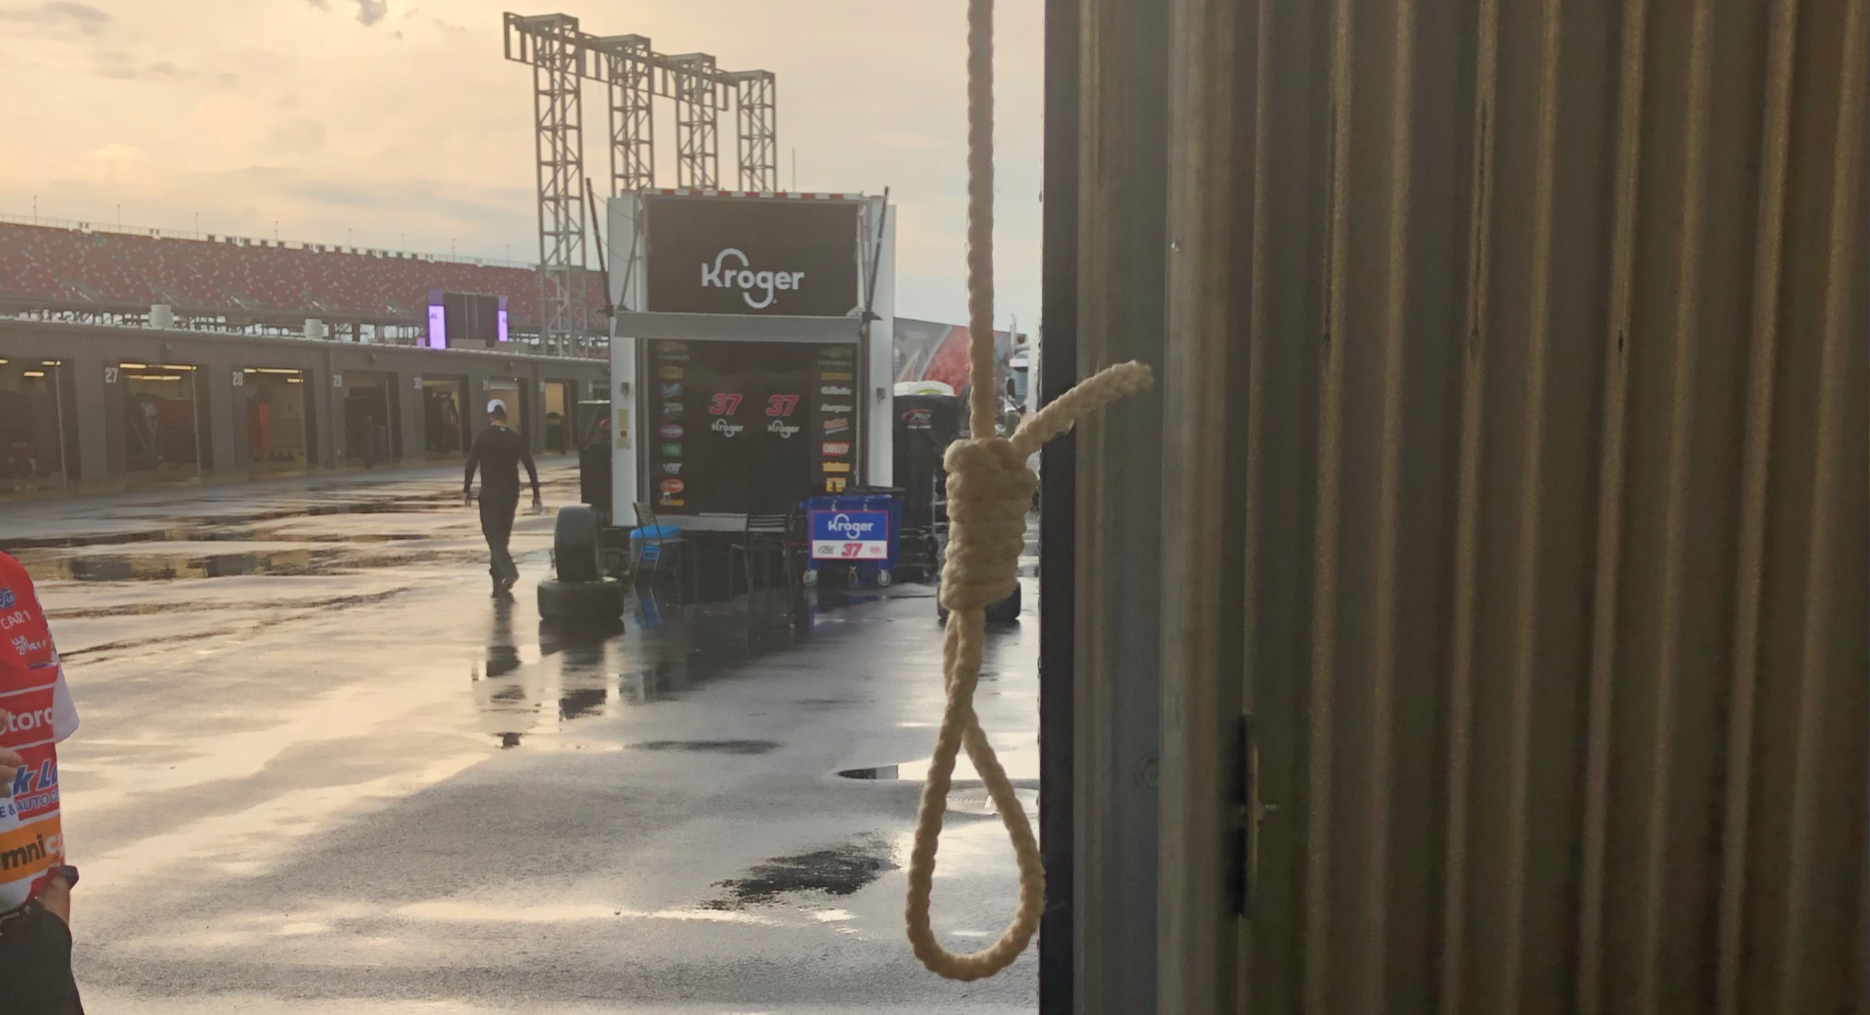 NASCAR releases image of noose found in Bubba Wallace's garage at Talladega Superspeedway